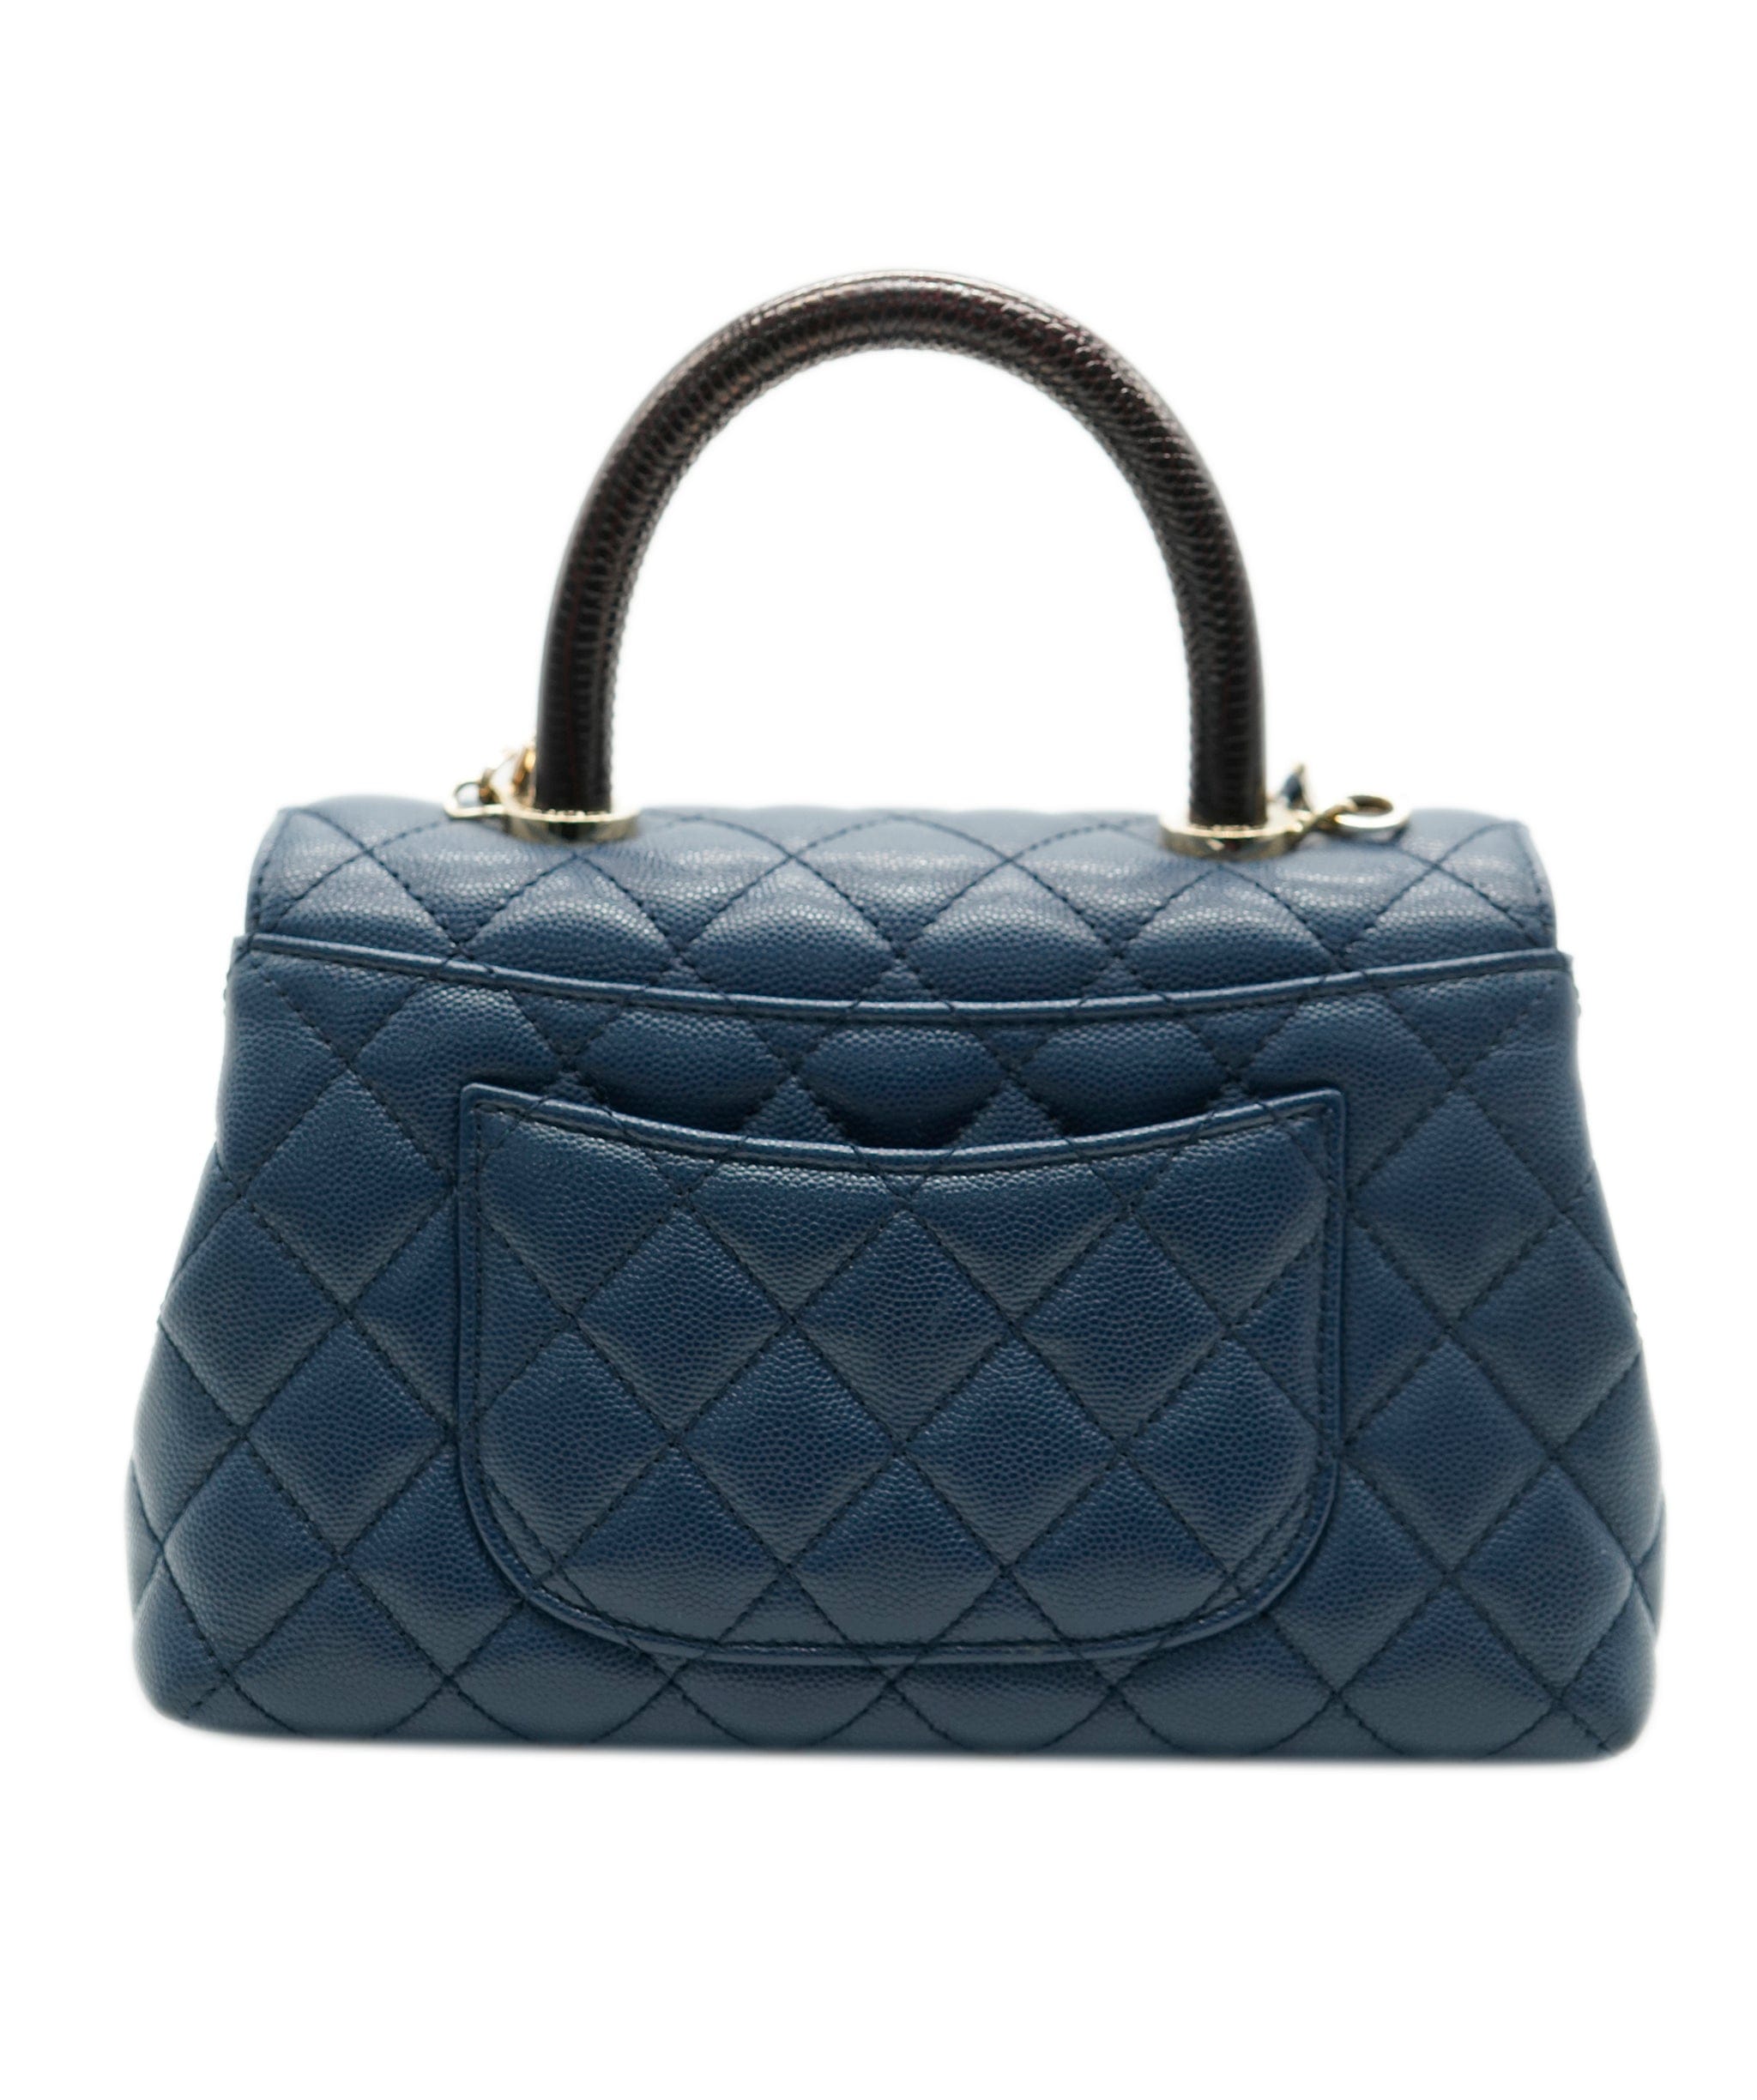 Chanel Chanel Coco Navy Top Handle with Lizard  ALC1342